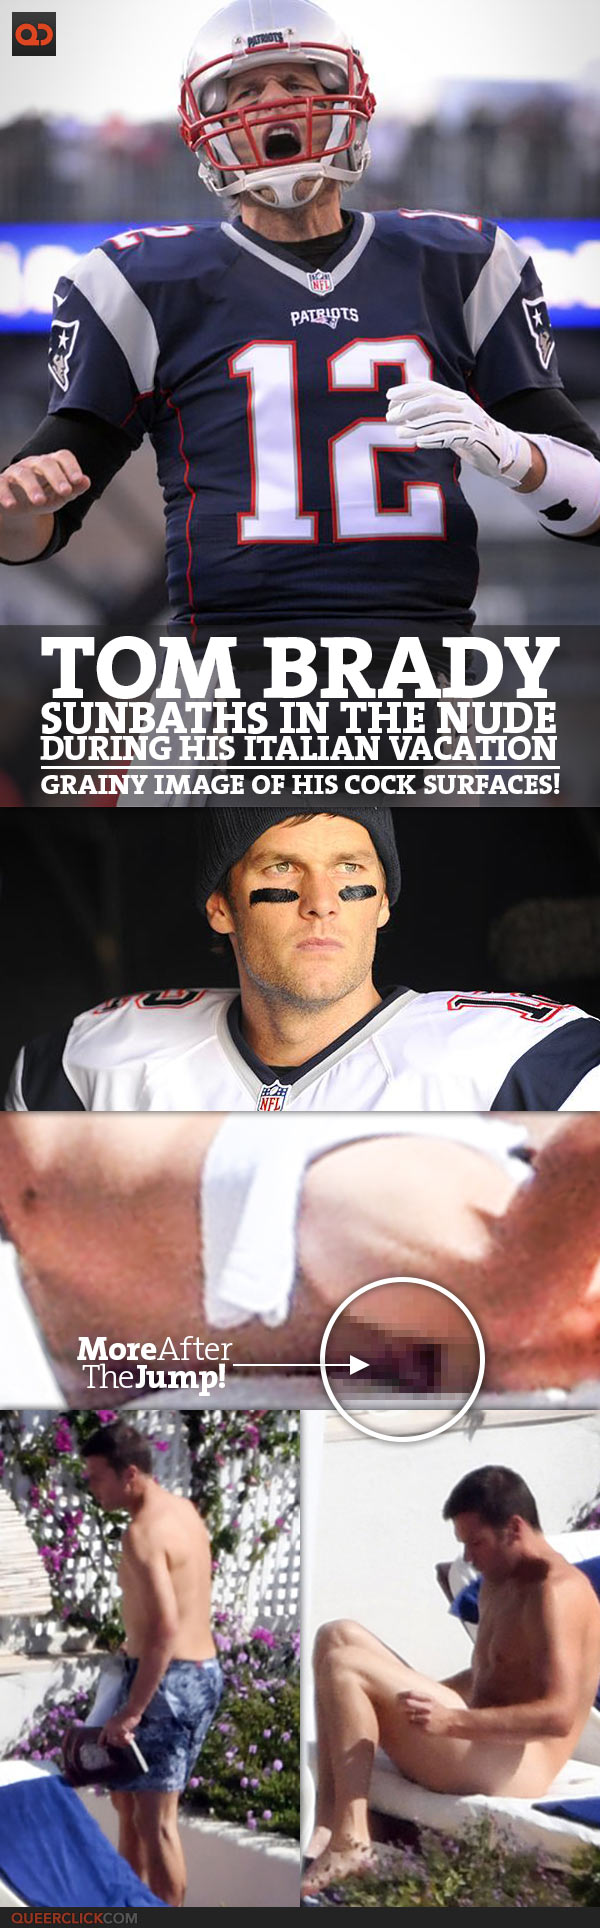 Tom Brady Sunbaths In The Nude During His Italian Vacation - Grainy Image Of His Cock Surfaces!